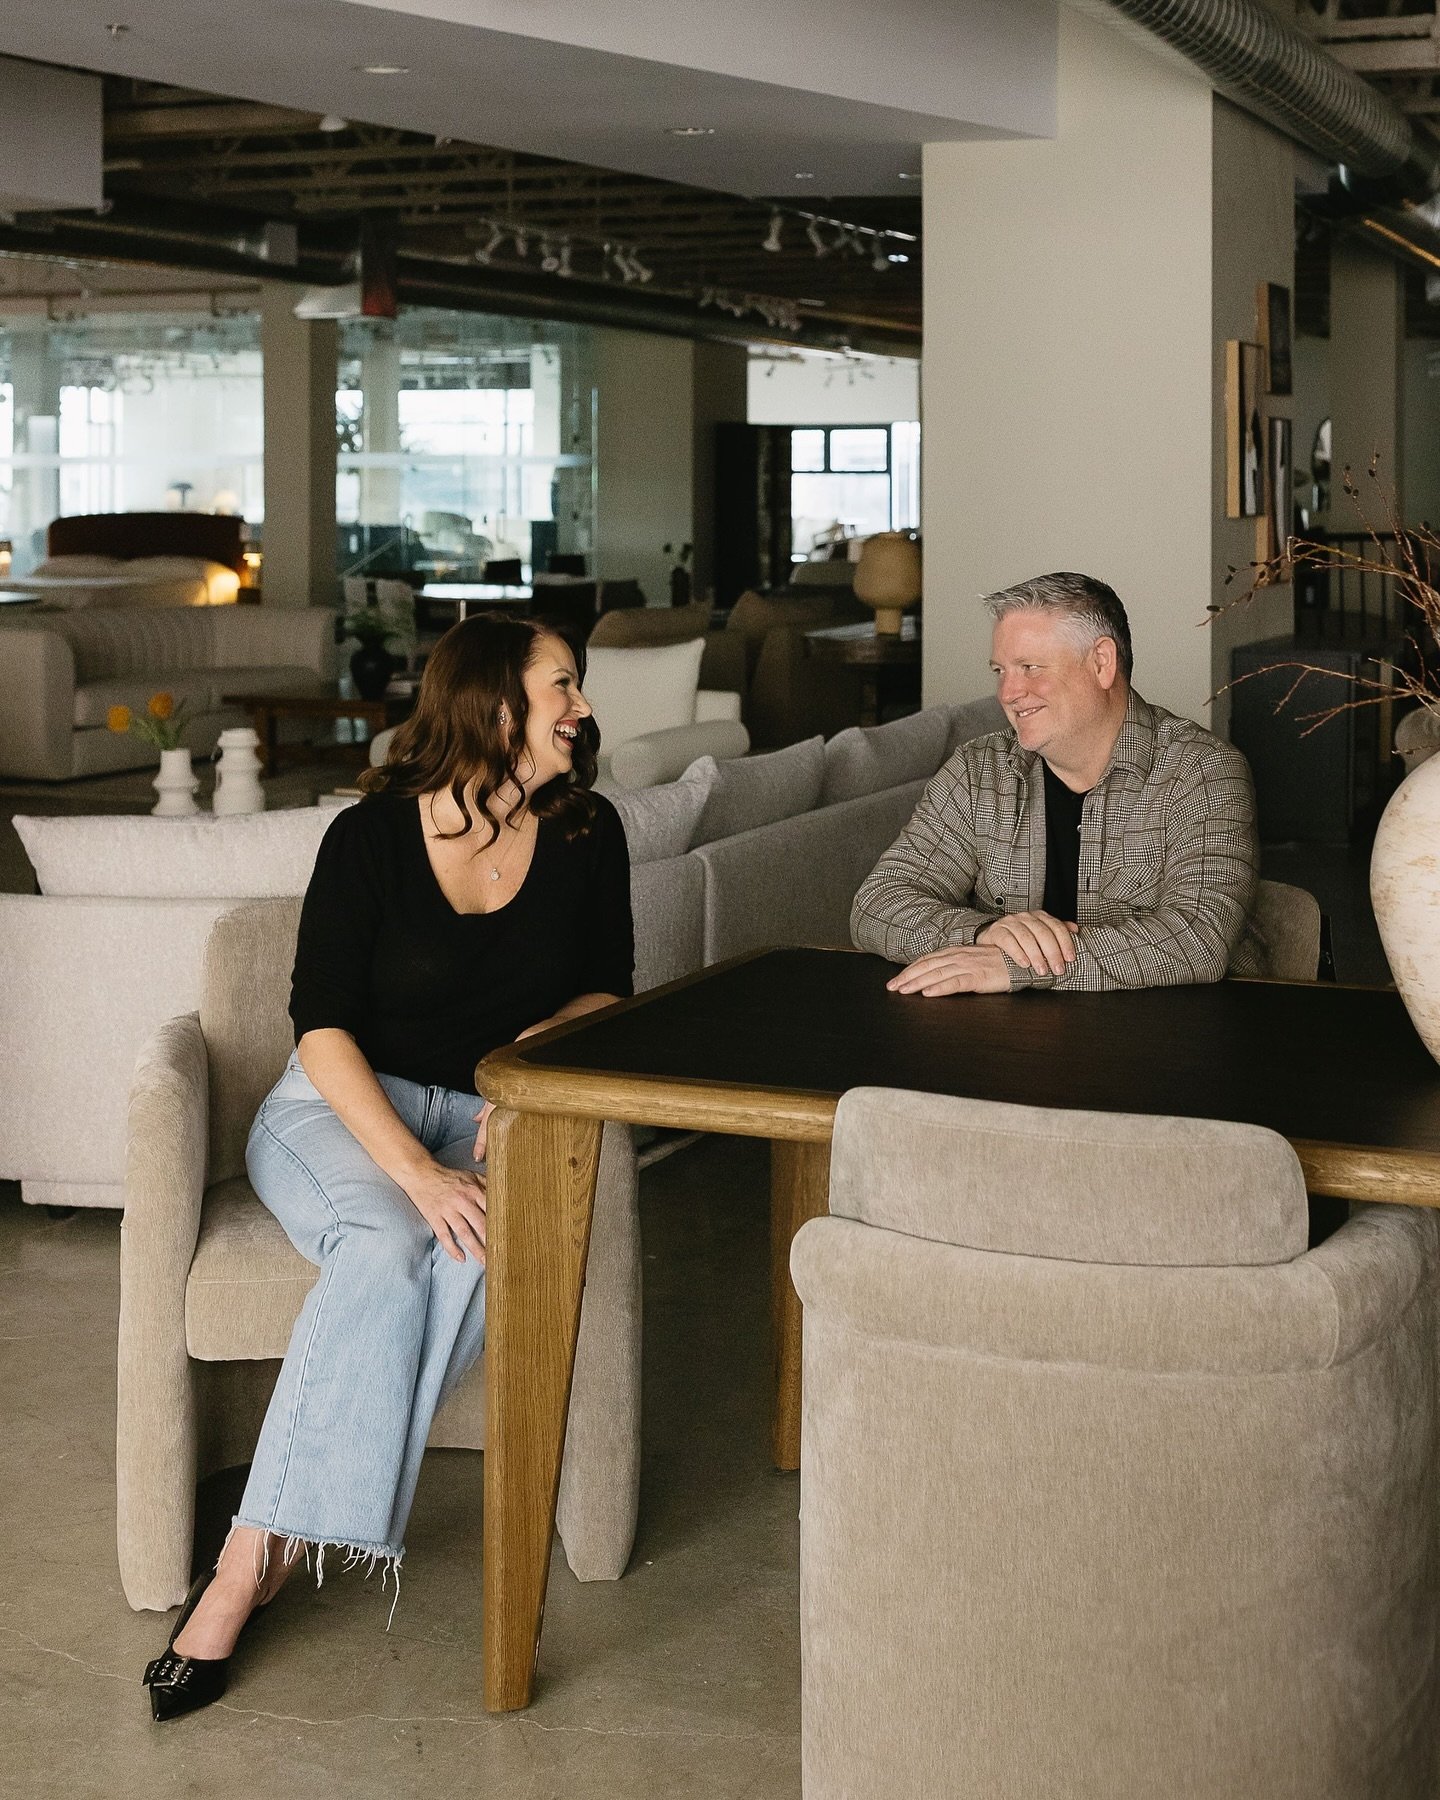 Tanya and Jamie: the dynamic duo fueling Jay Kay Sales with passion and dedication. ✨ Together, they tirelessly strive to deliver top-tier products to you.
.
.
.
.
.
#jaykaysales #interiordesign #yegdesign #vancouverfurniture #yvrinteriordesign #kelo